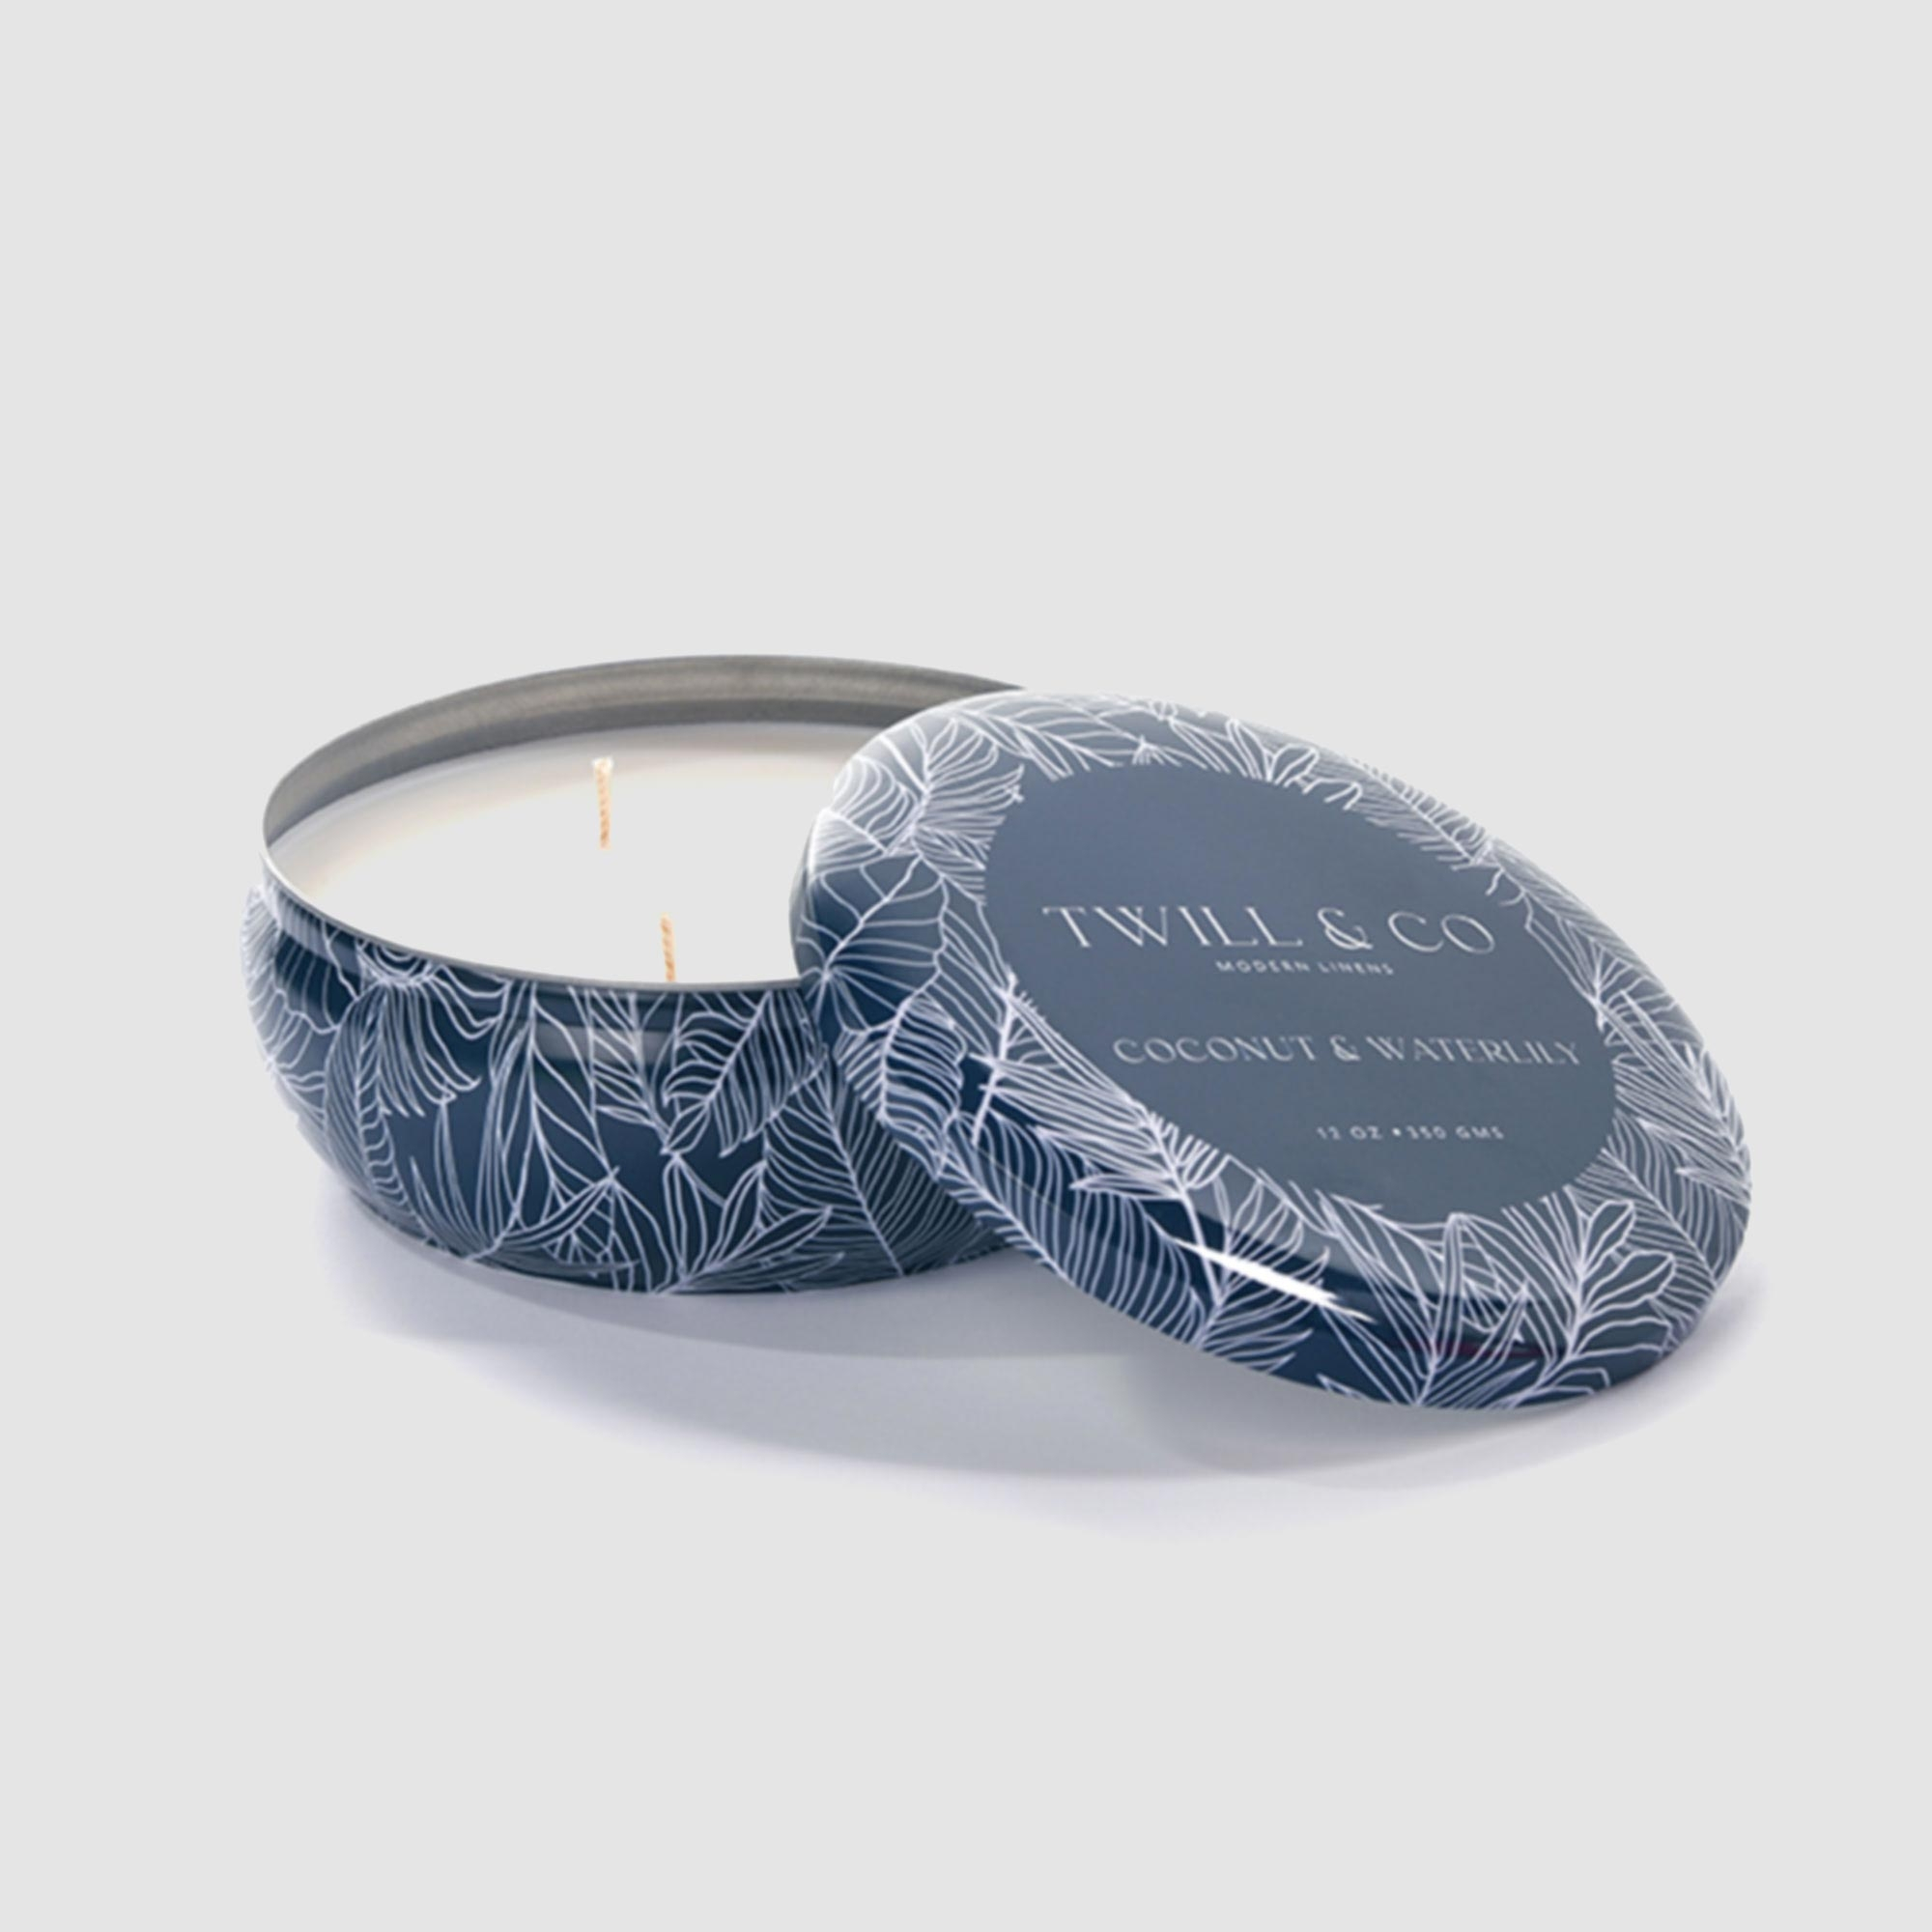 Twill & Co Tin Candle Coconut & Waterlily Navy 350gm